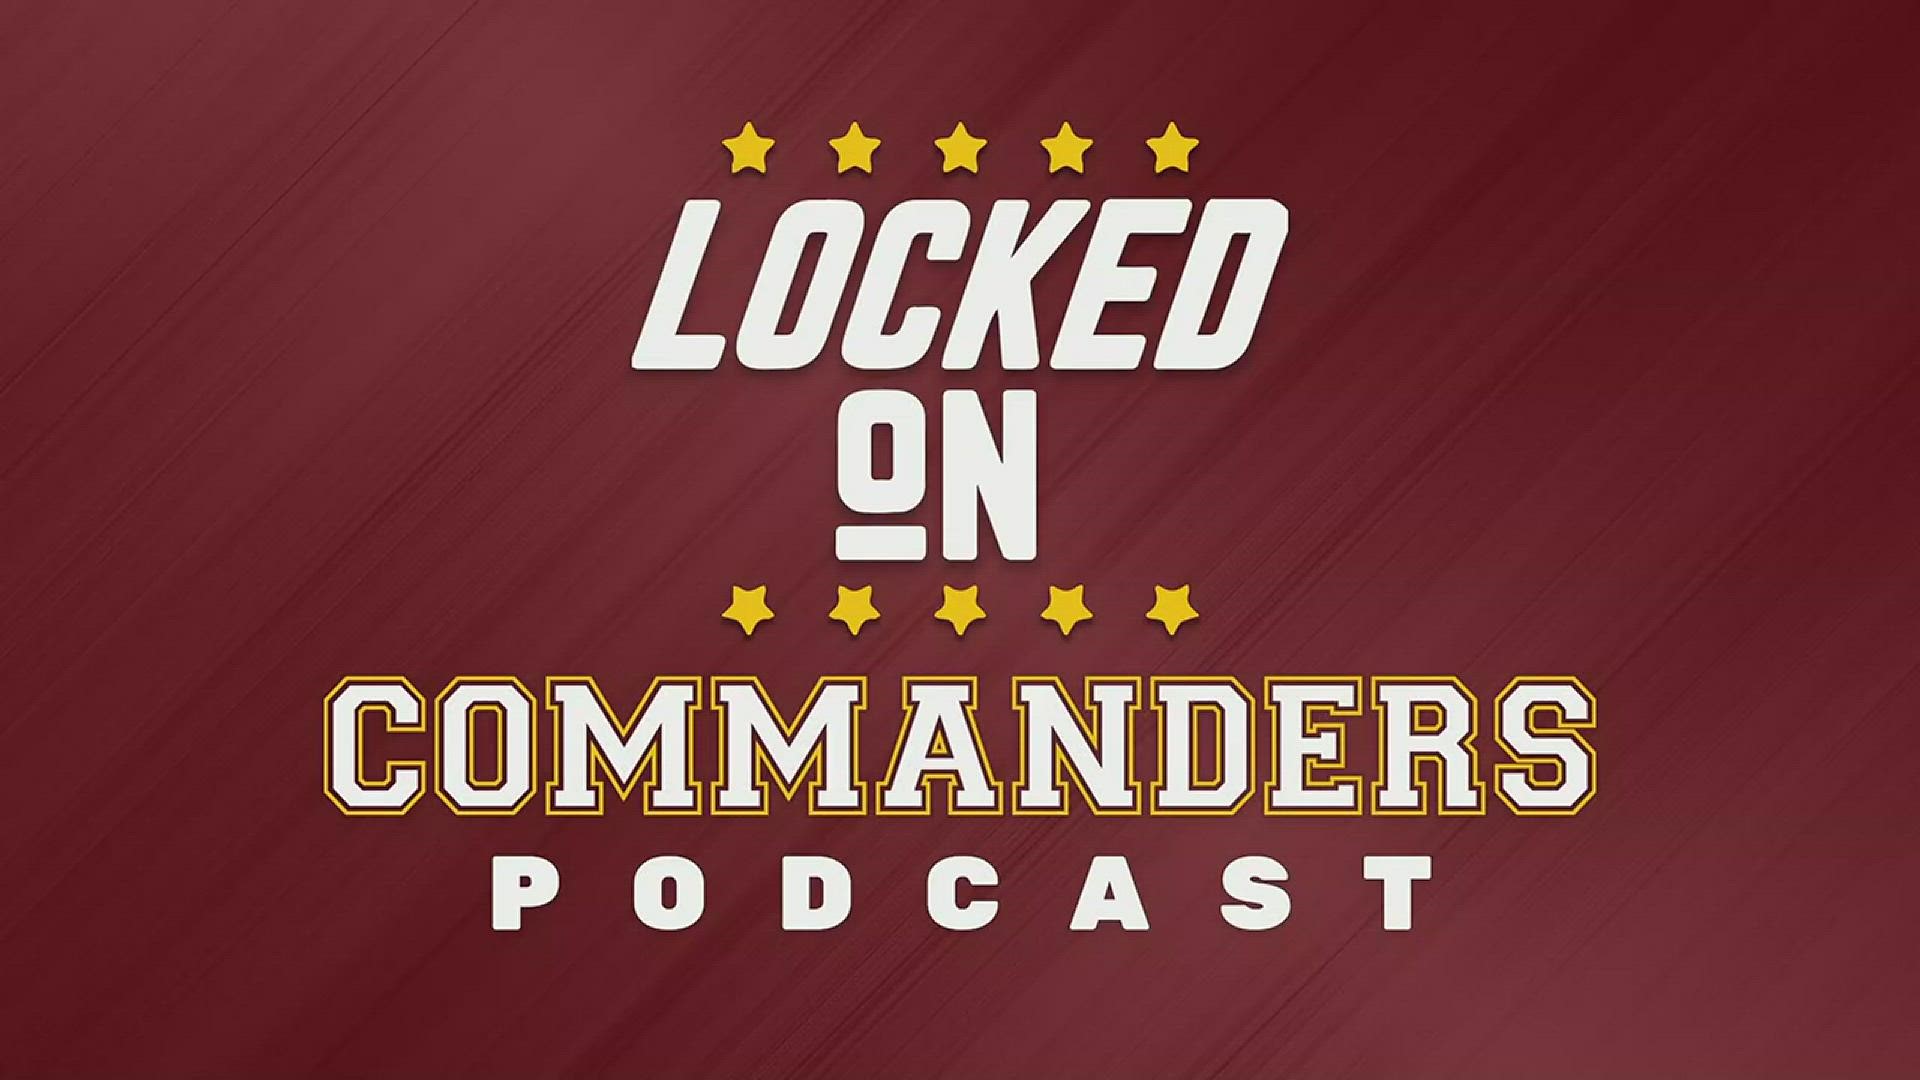 Ryan Kerrigan retired from football to start the week and talked to the media at training camp. The Locked On Commanders podcast looks back at a great career.